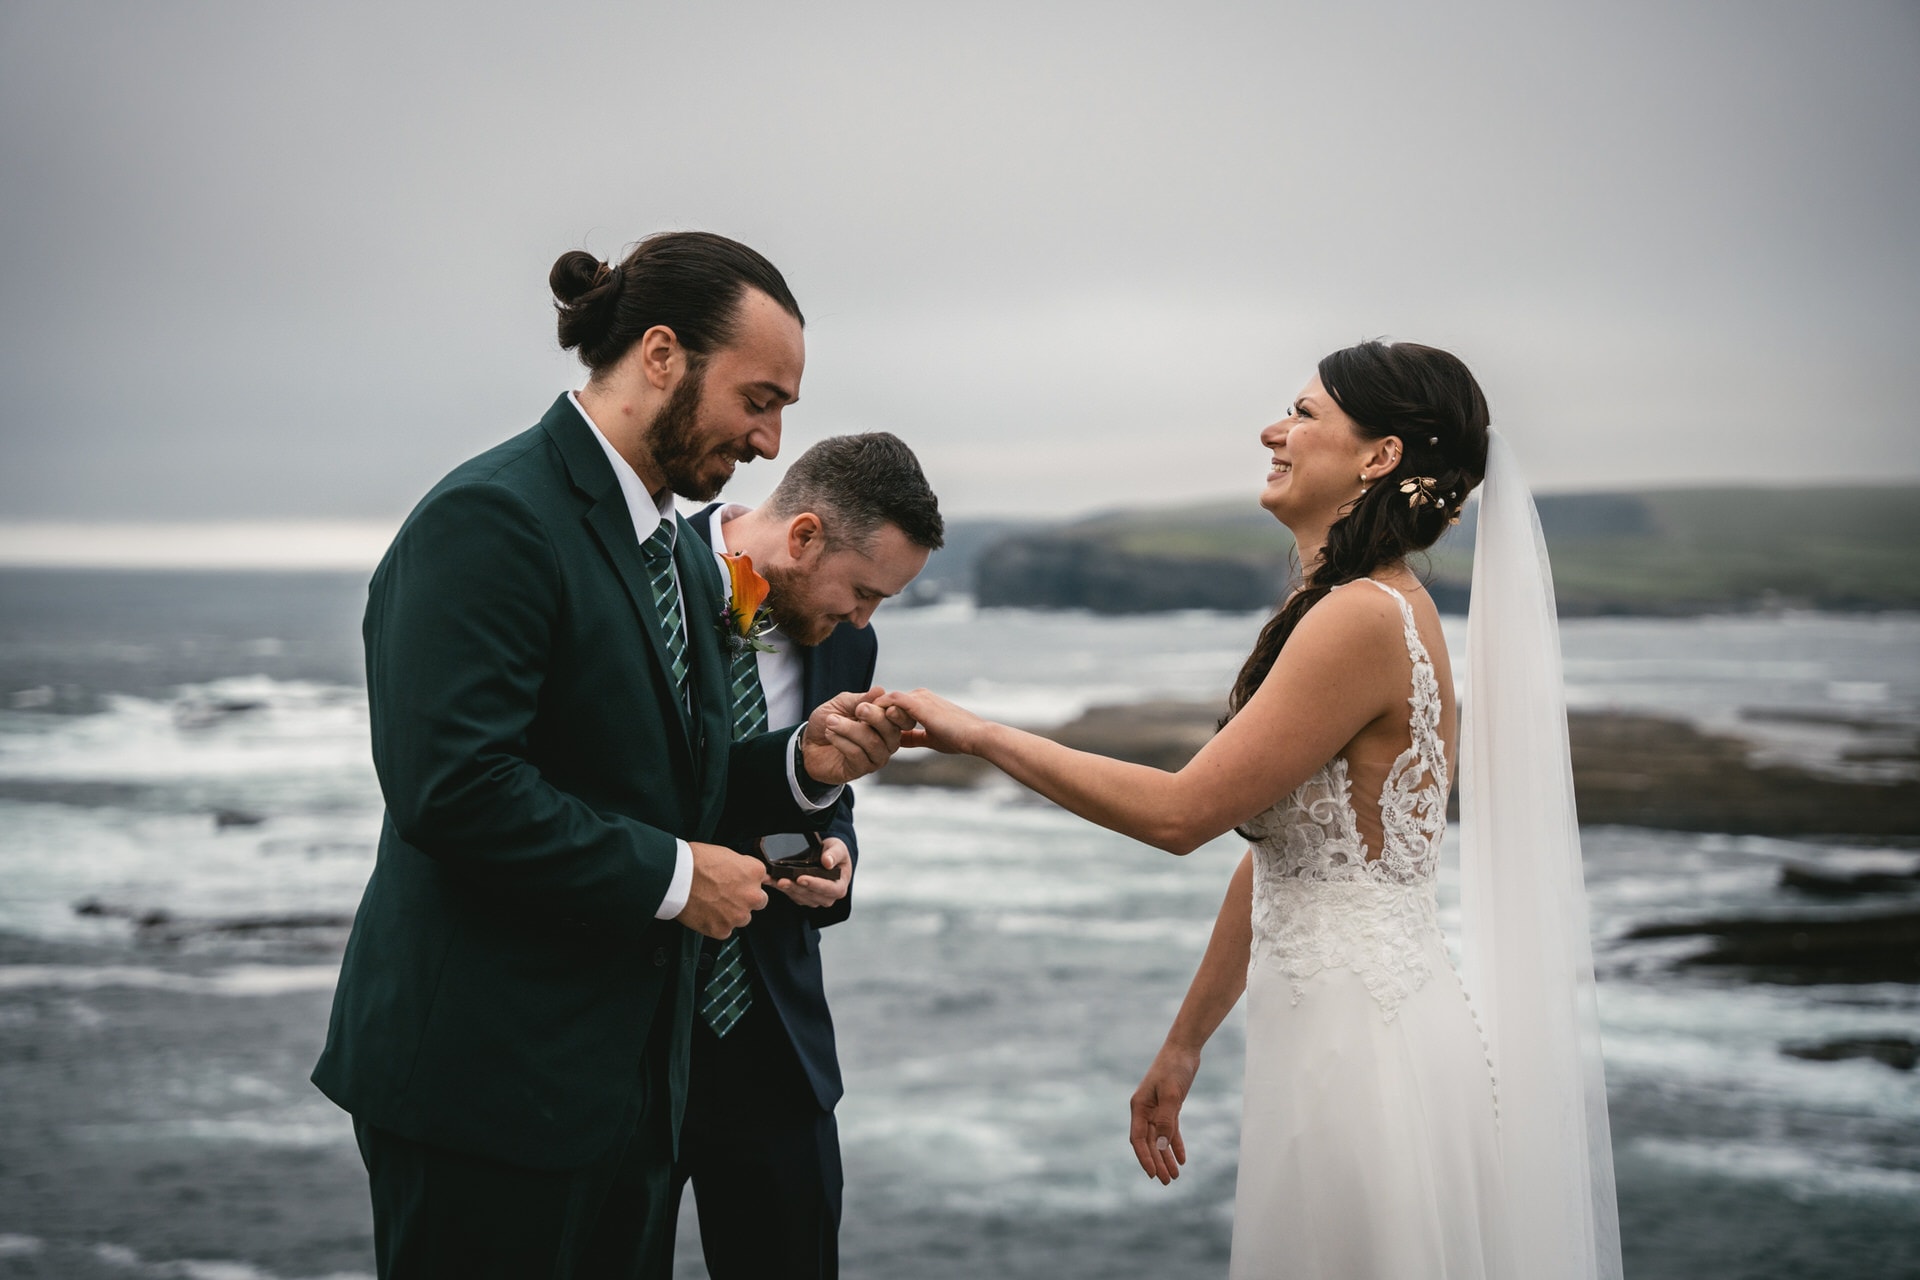 Serenity by the sea during their Irish elopement.